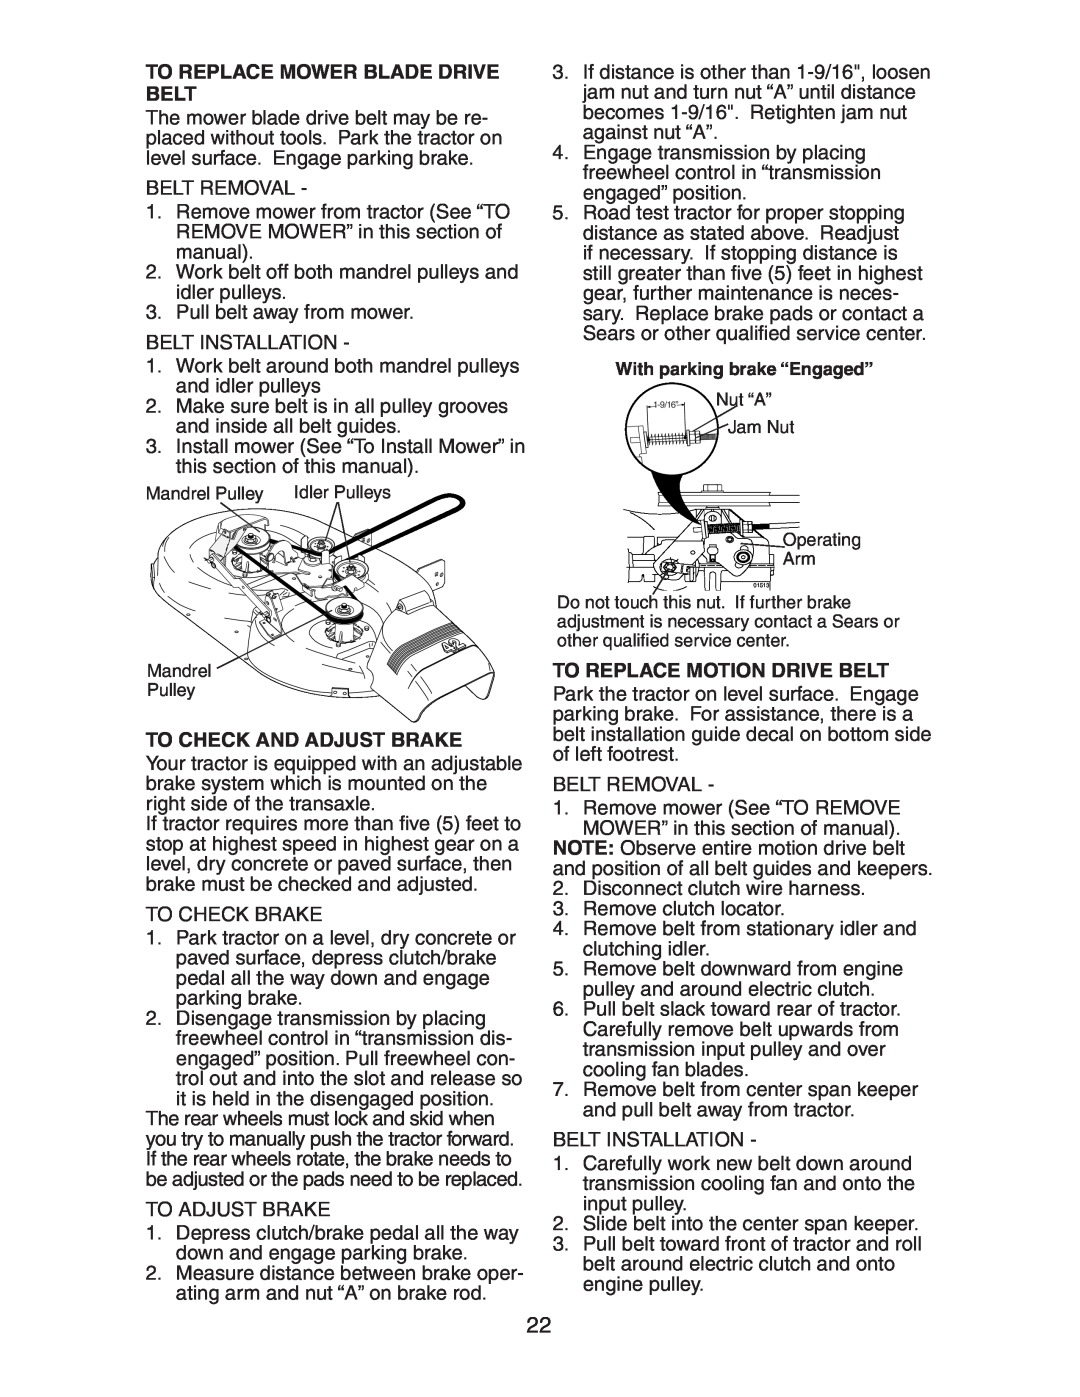 Poulan CO185H42STB manual To Replace Mower Blade Drive Belt, To Check And Adjust Brake, To Replace Motion Drive Belt 